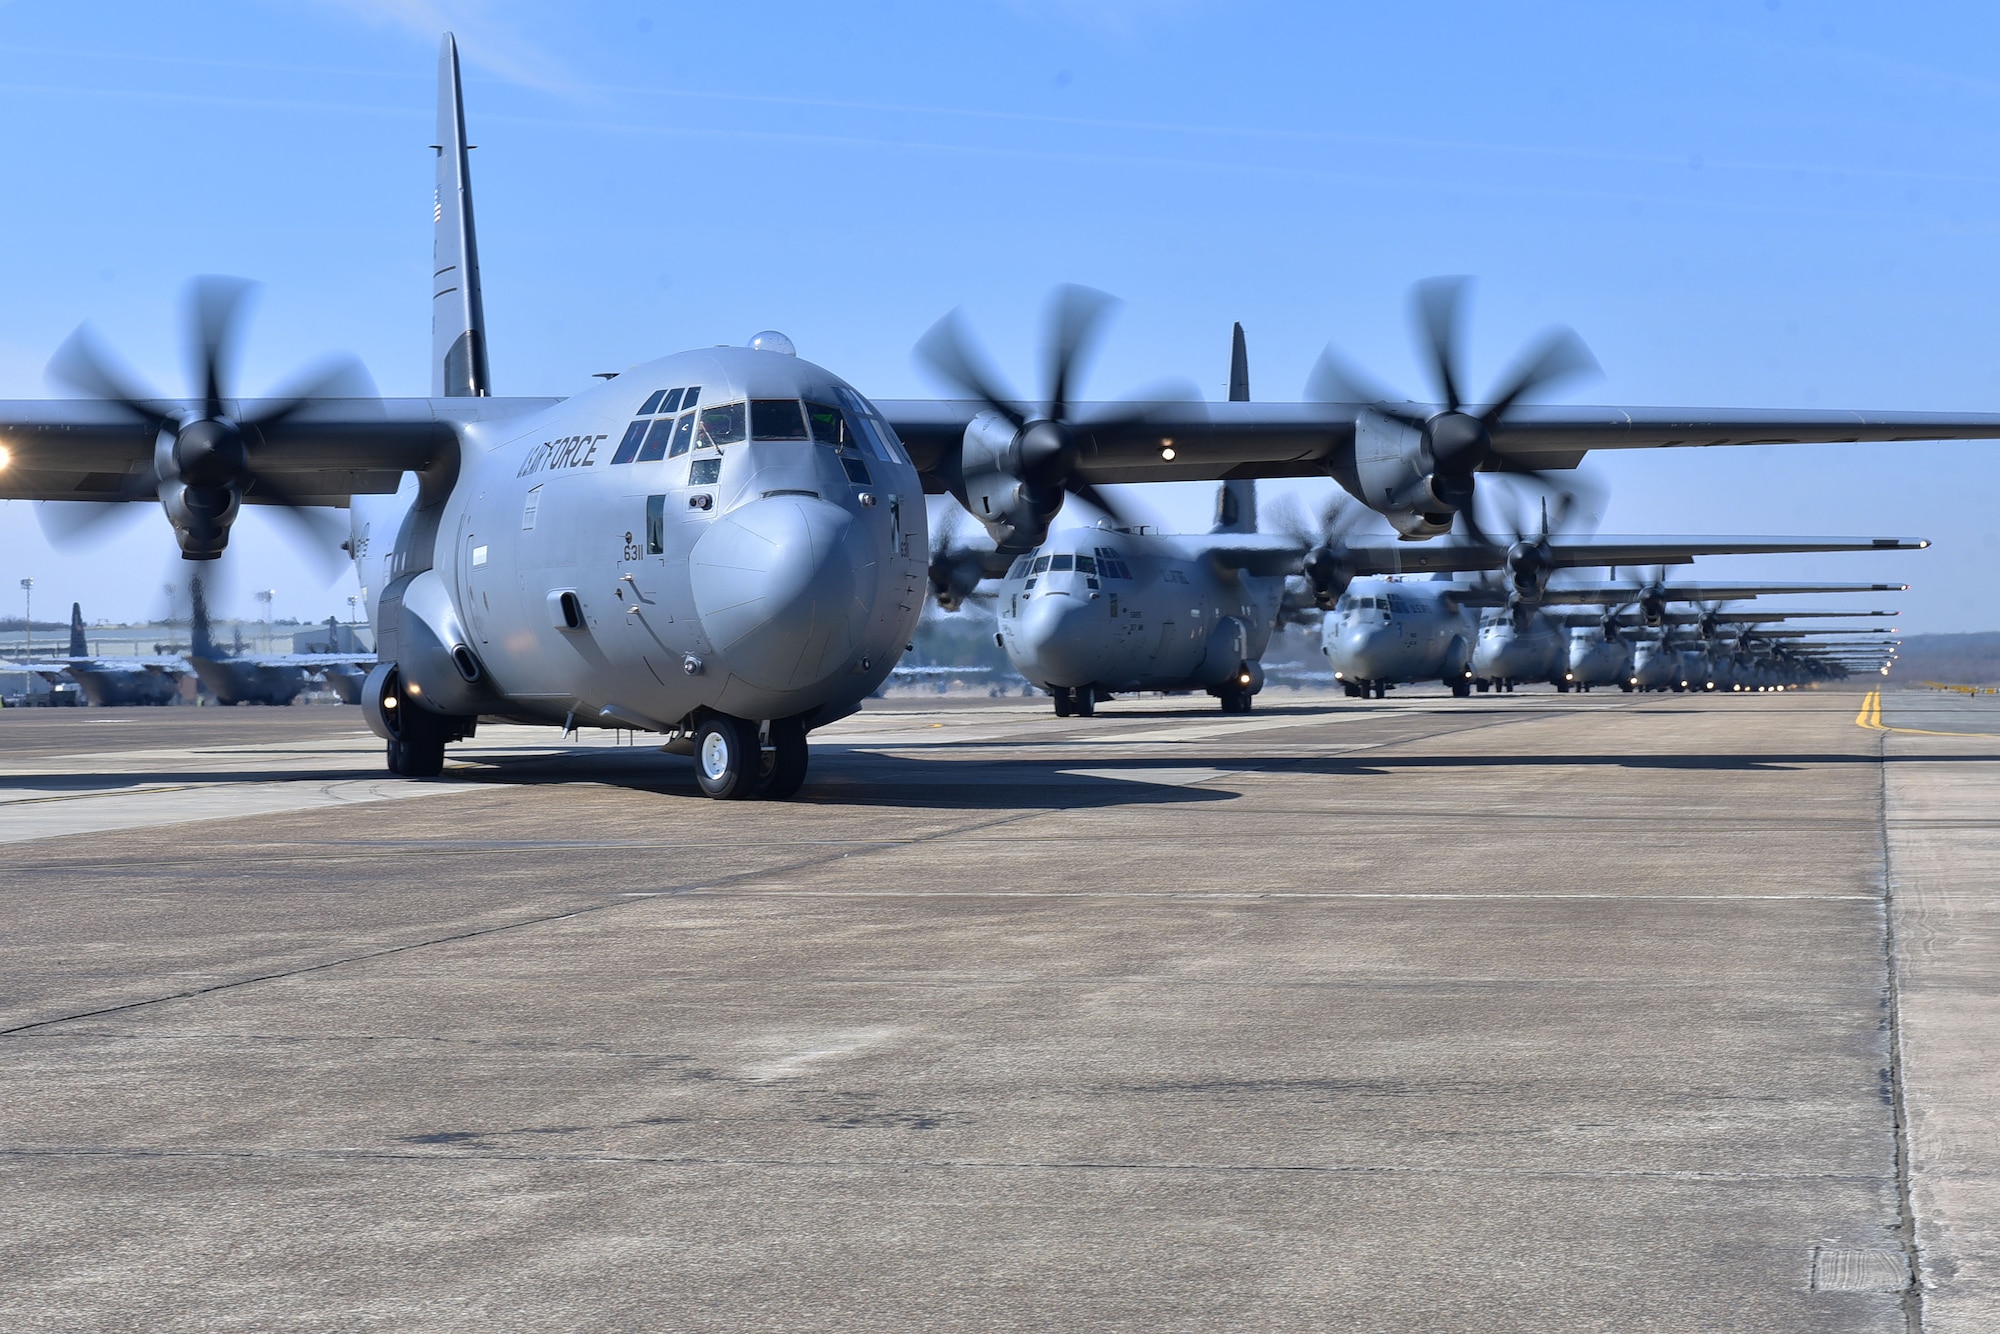 Nineteen C-130s taxi and prepare for takeoff.